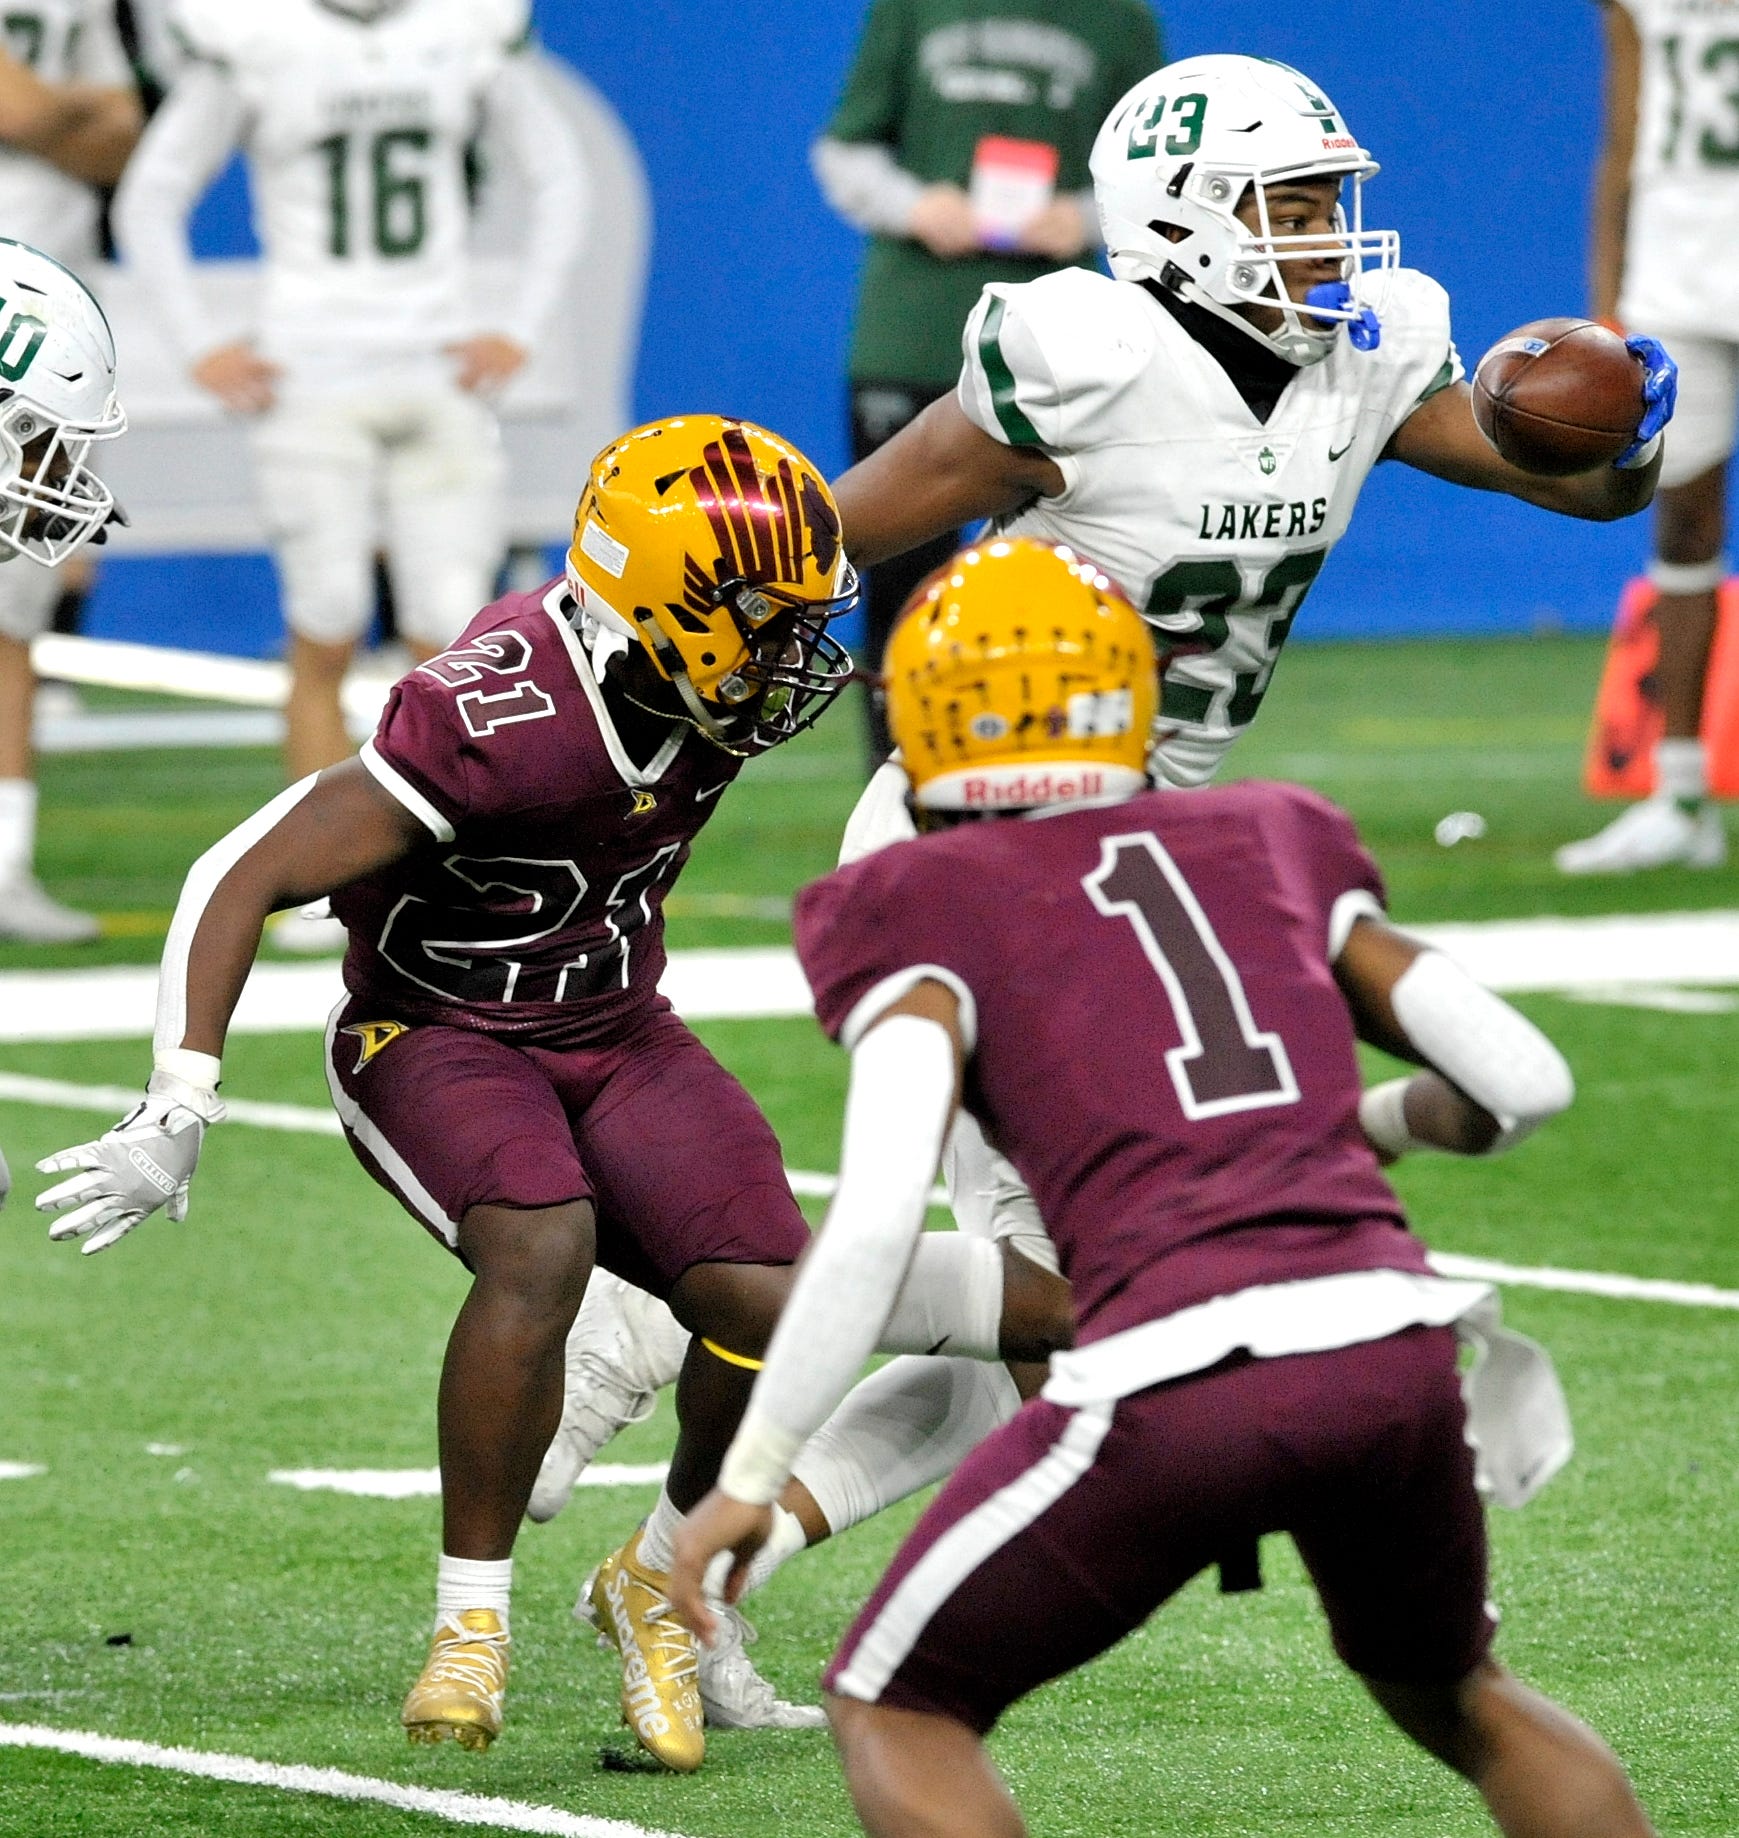 West Bloomfield's Niles King (23) strips the ball from Davison's Jayâlen Flowers (21) early in the 3rd quarter and runs for a WB touchdown.